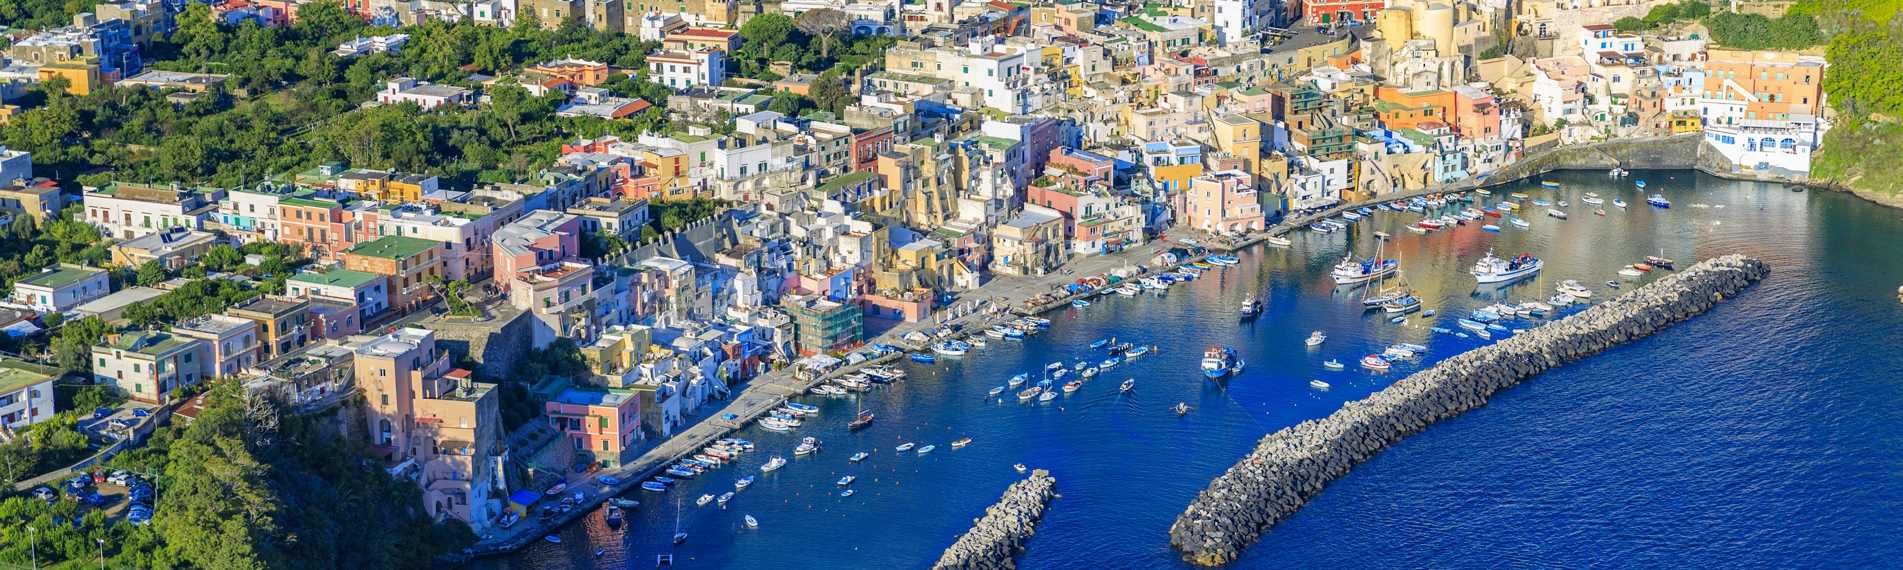 View of Procida from above.